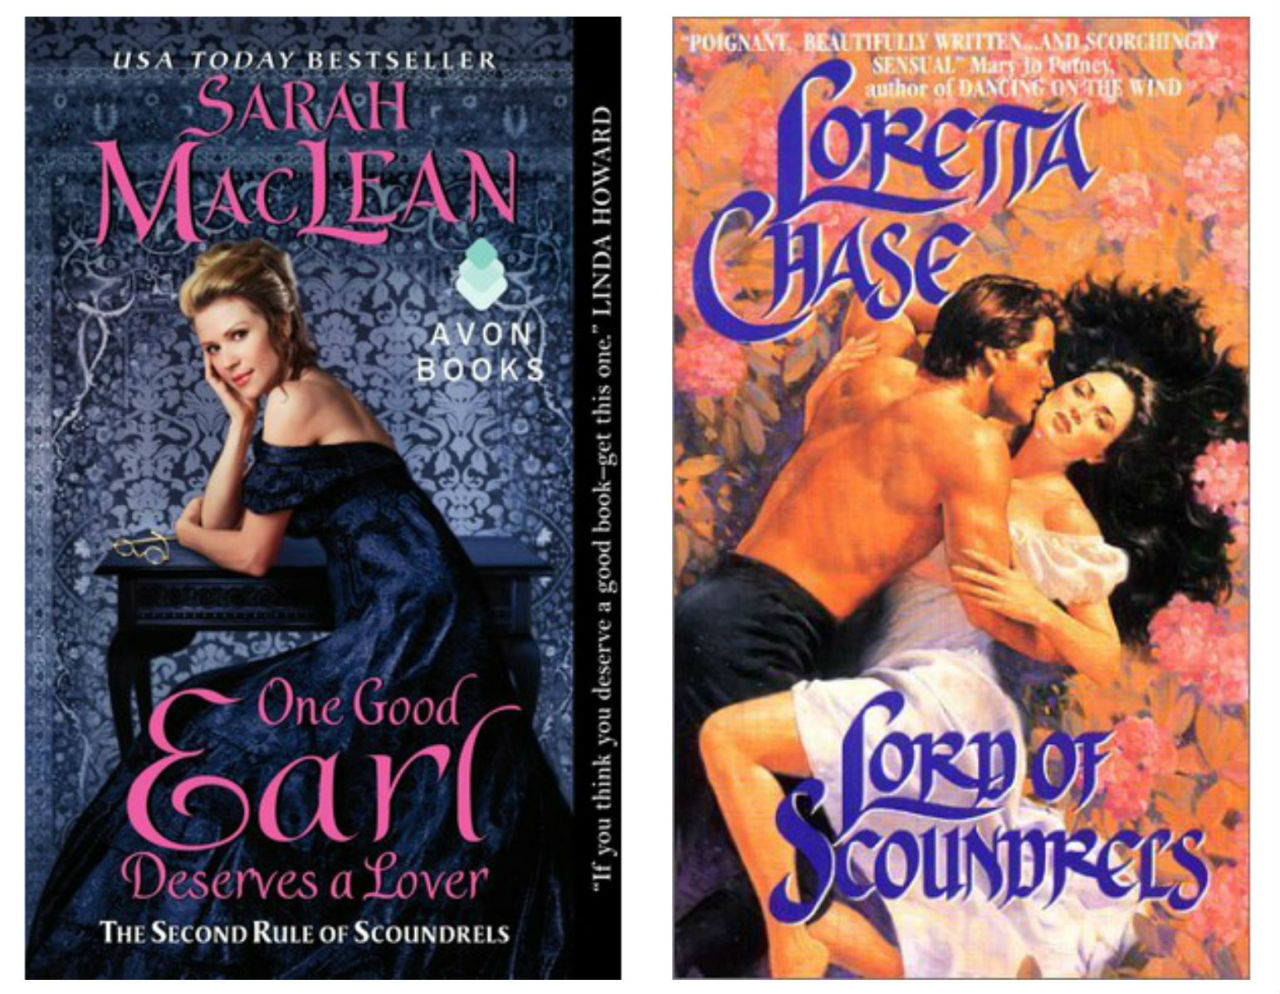 One Good Earl Deserves a Lover by Sarah MacLean & Lord of Scoundrels by Loretta Chase